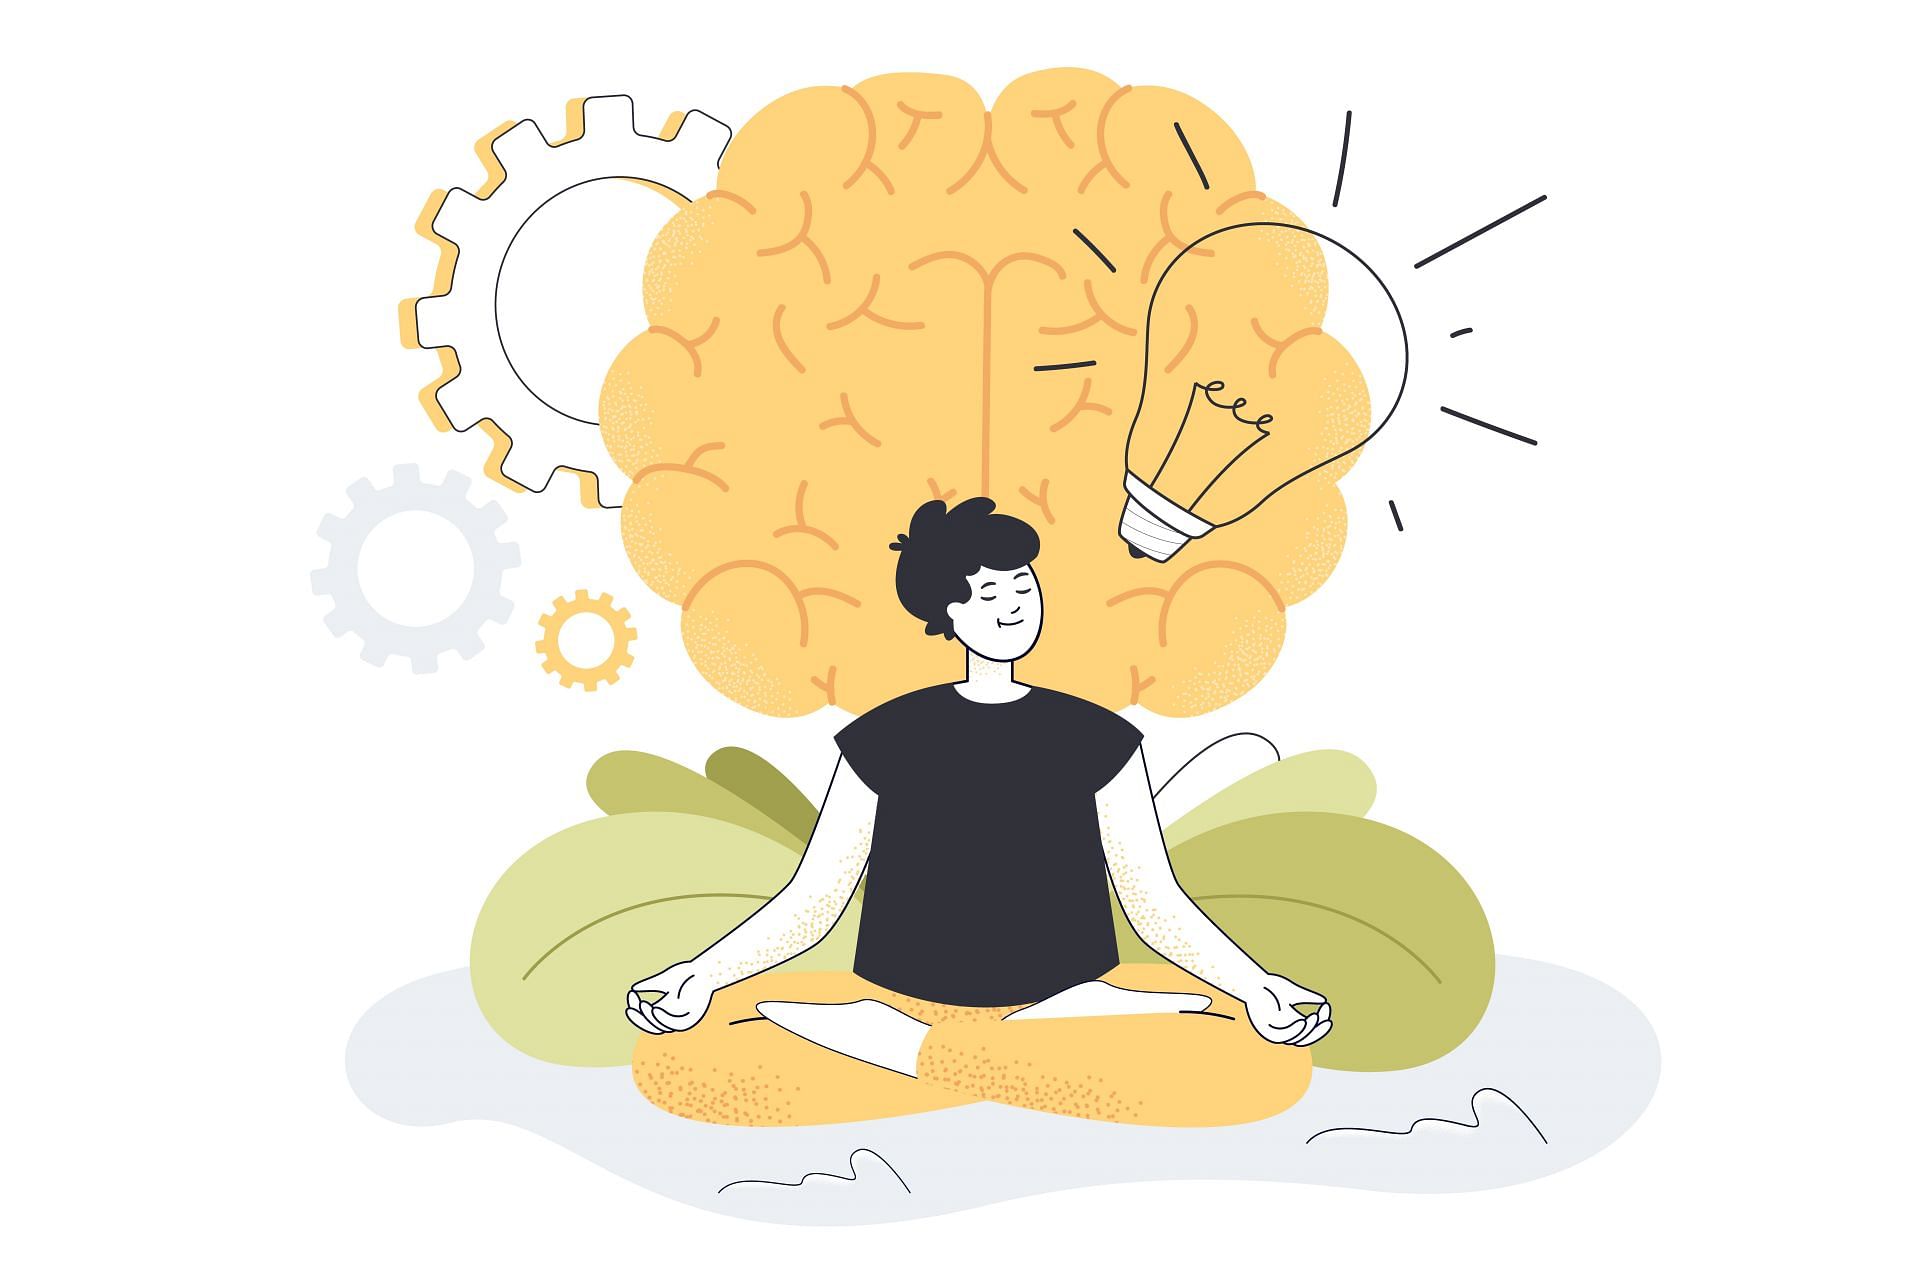 Mindfulness helps you at deeper levels. (Image via Freepik/Pch.Vector)